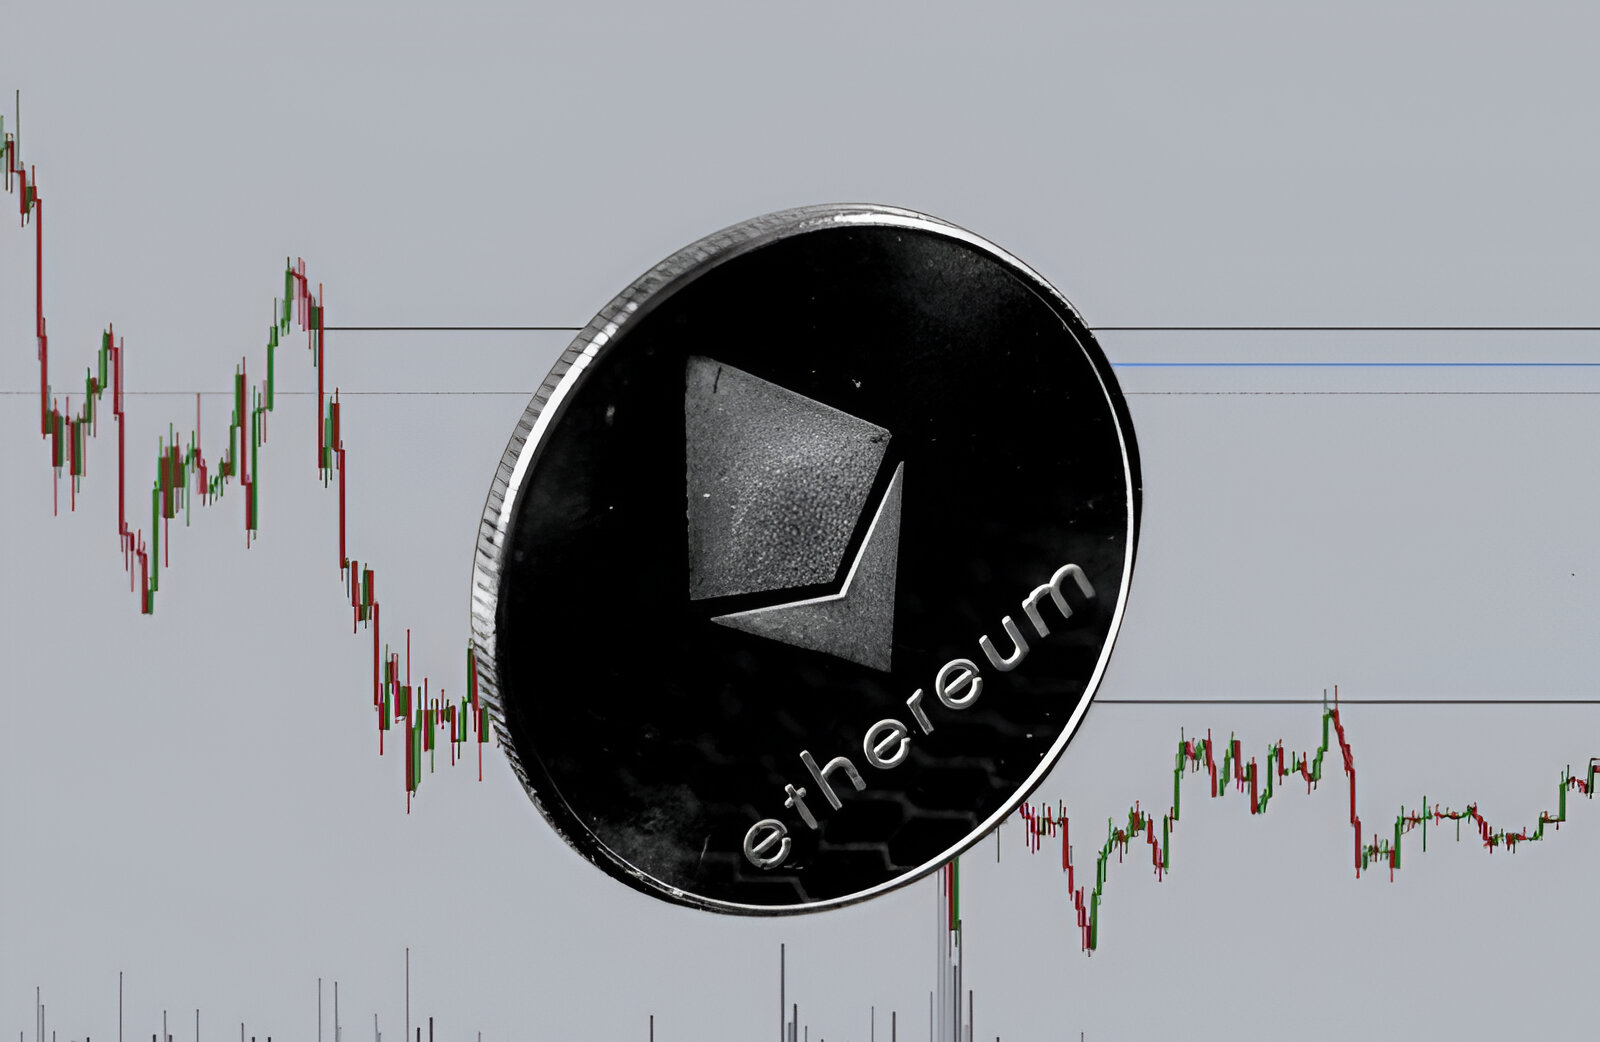 When Will Ethereum Price Go Up